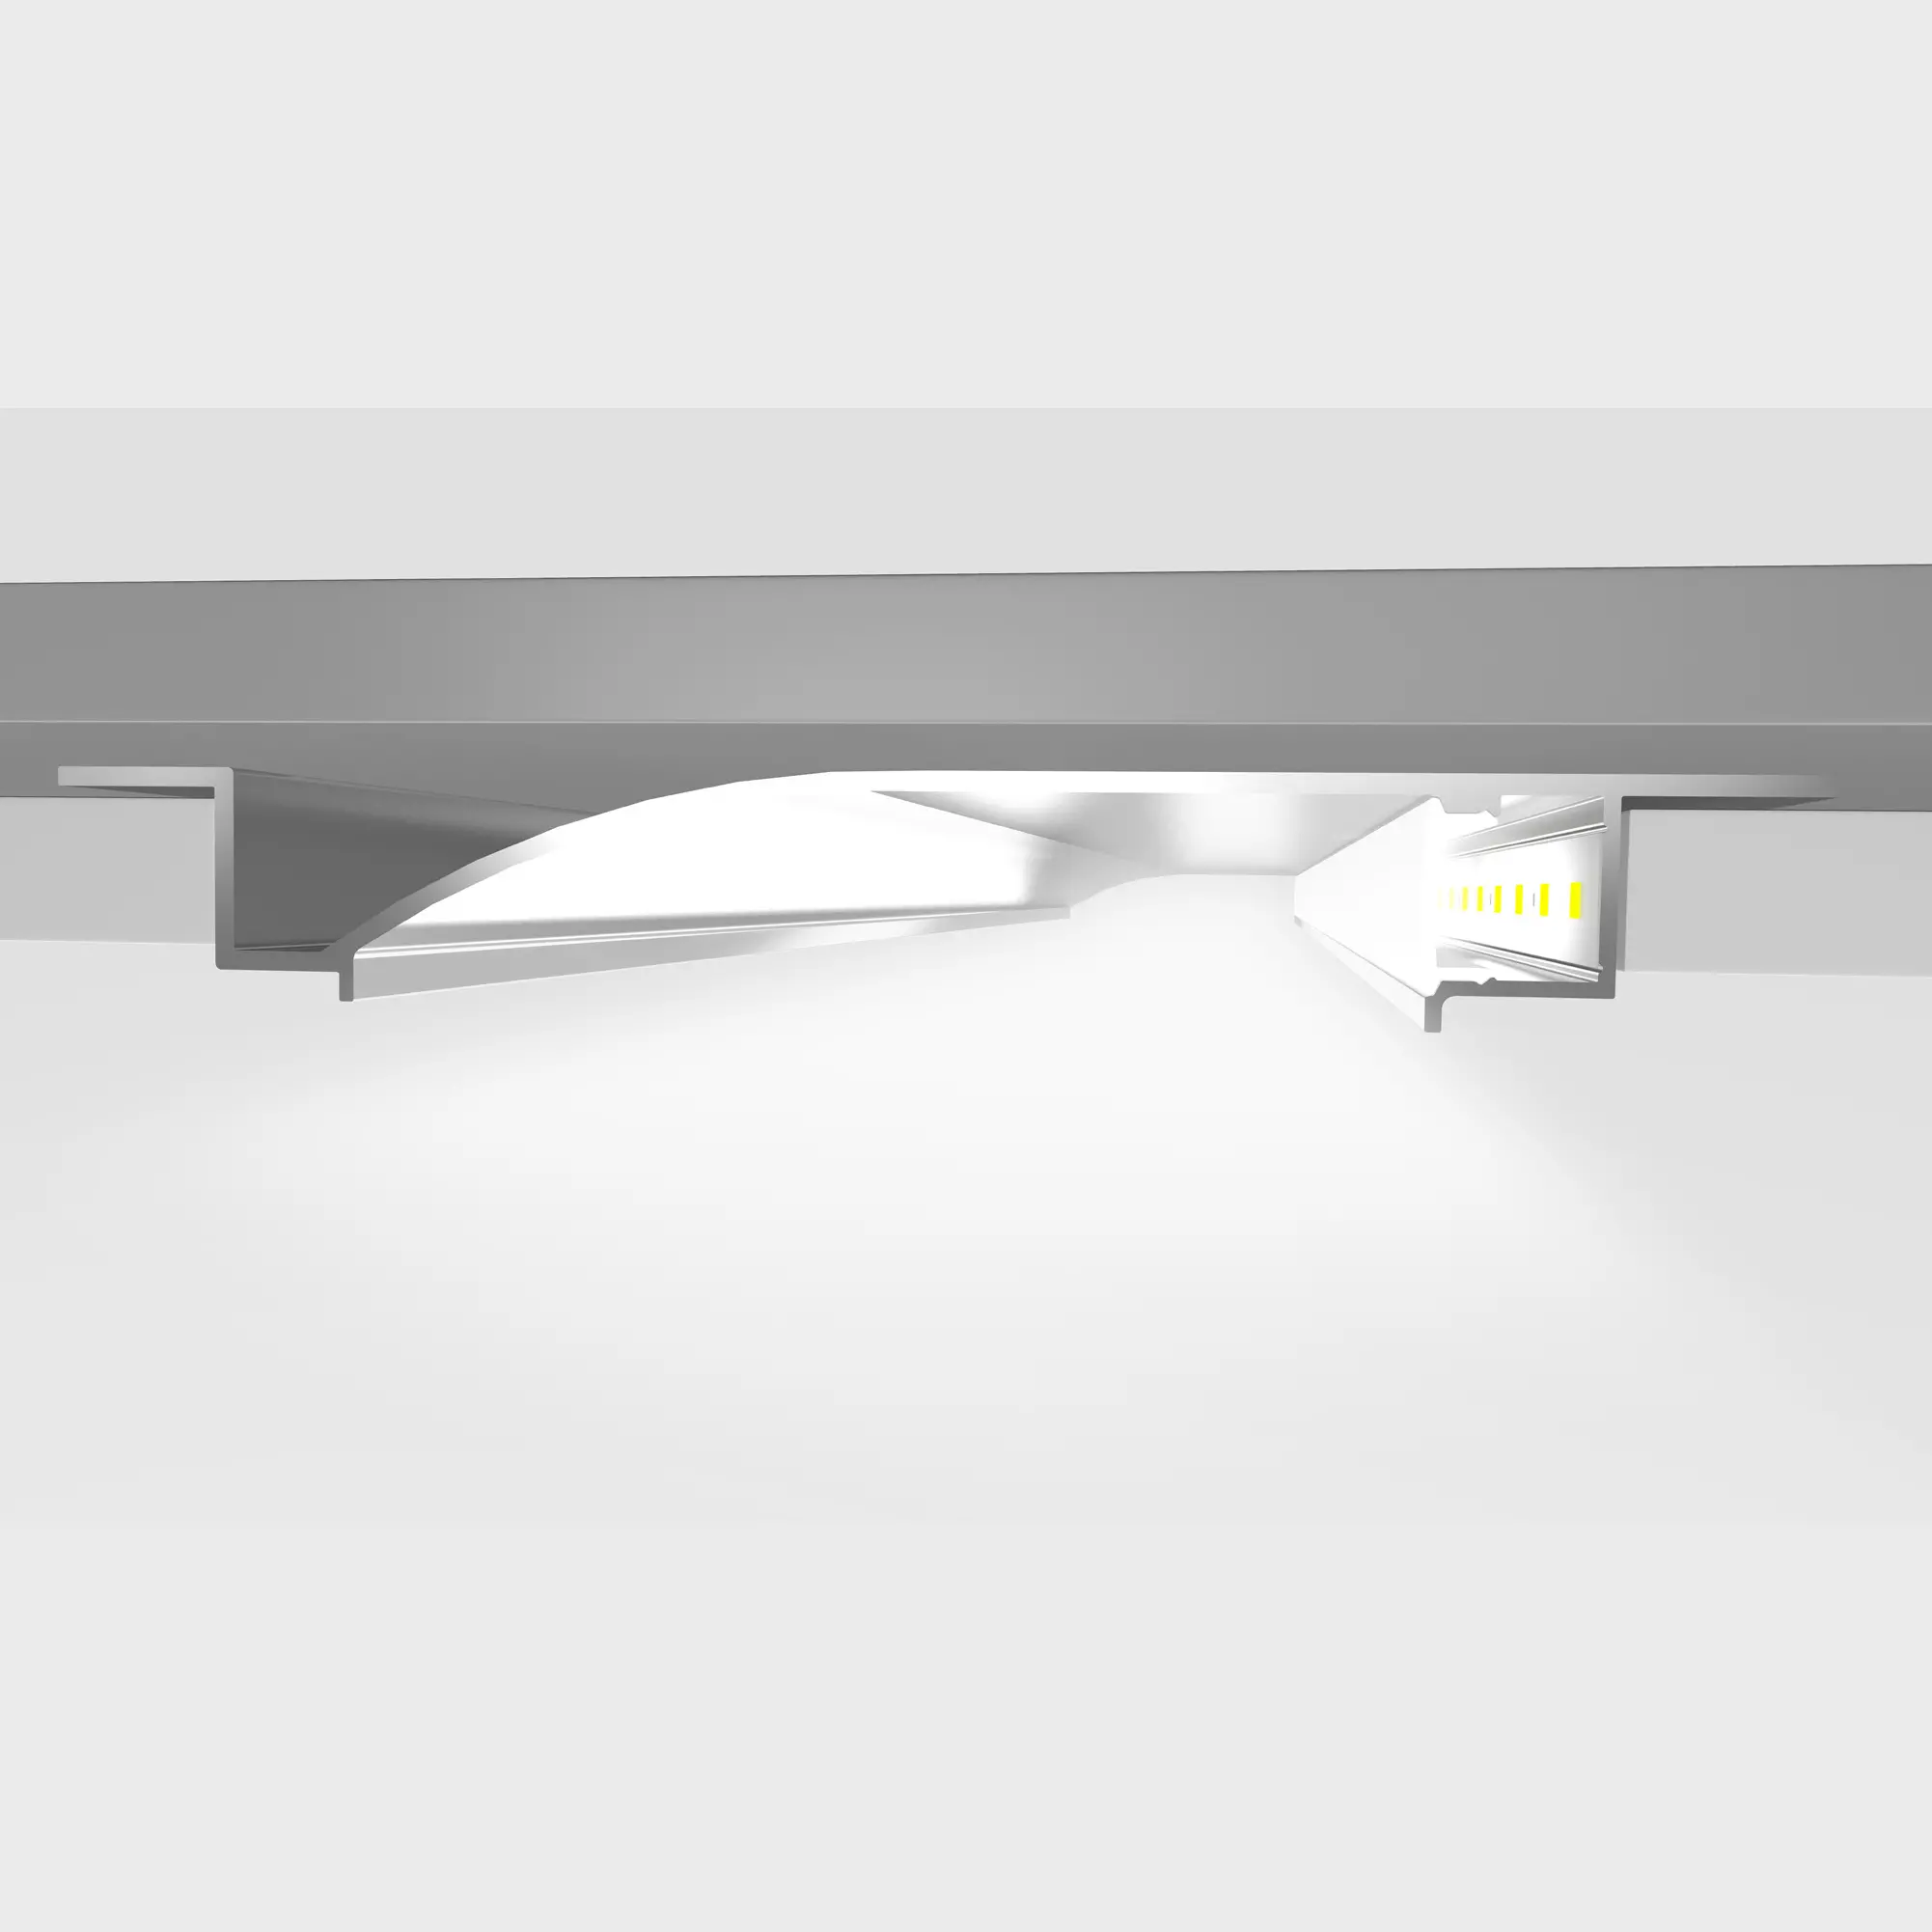 LD13519: Recessed Linear LED Profile